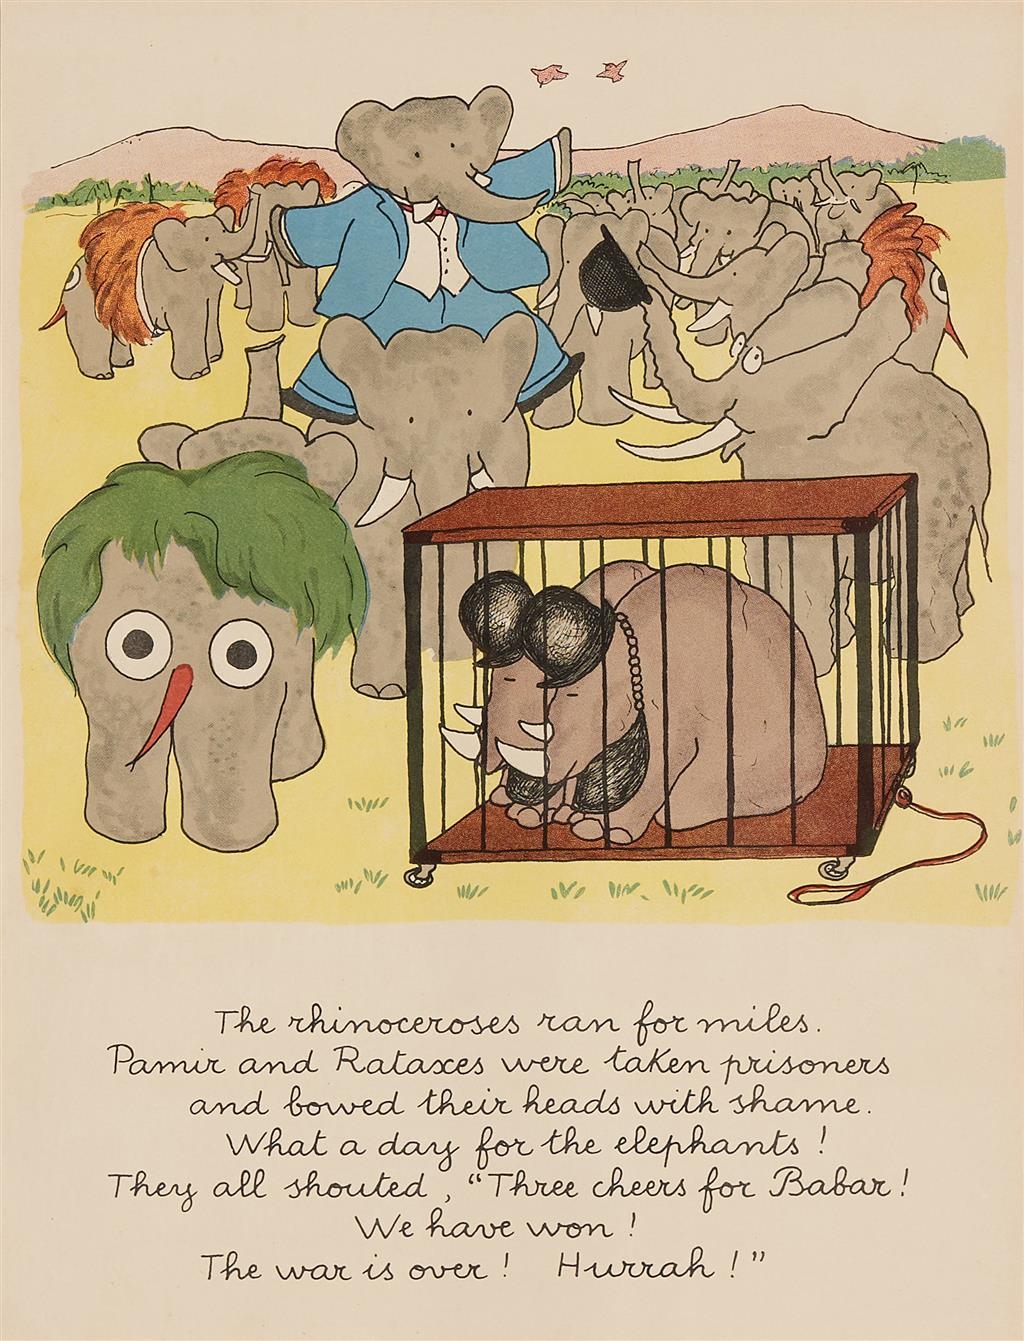 Artwork by Jean de Brunhoff, Babar The Elephant, Made of colour lithographs